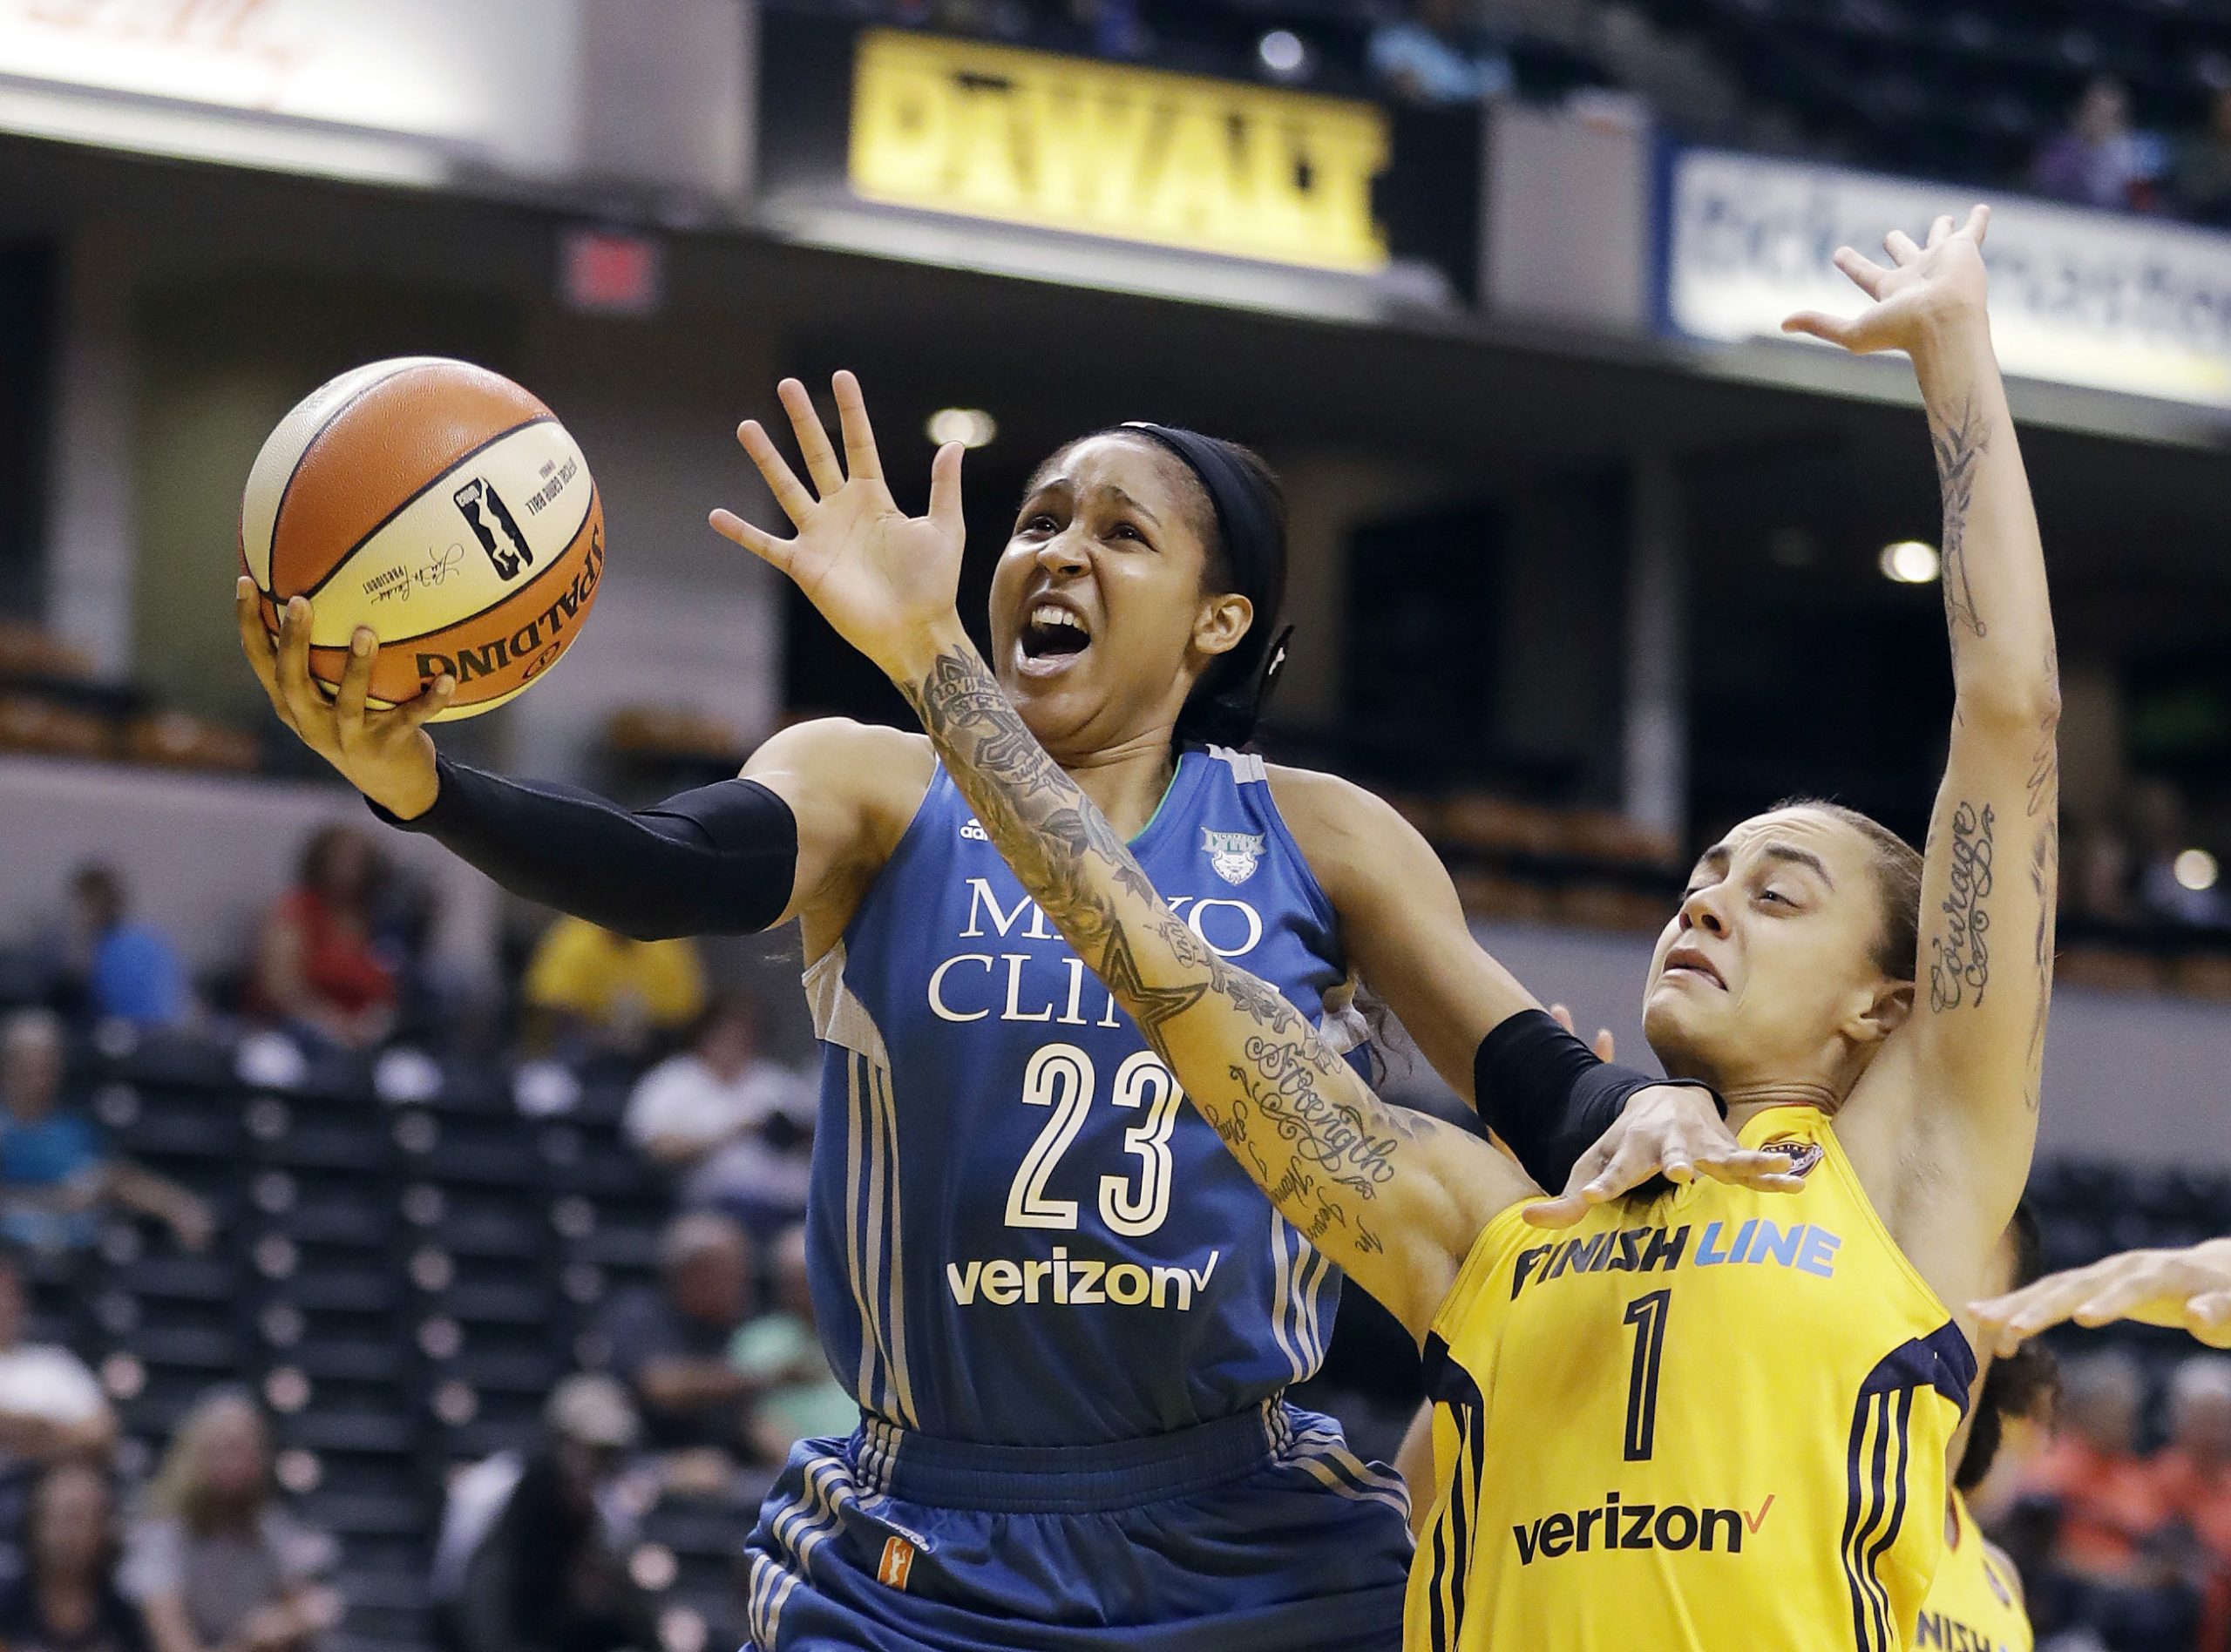 focus WNBA star Maya Moore Salta second year of professional basketball, and 2020 Criminal Justice Advocacy Olympics